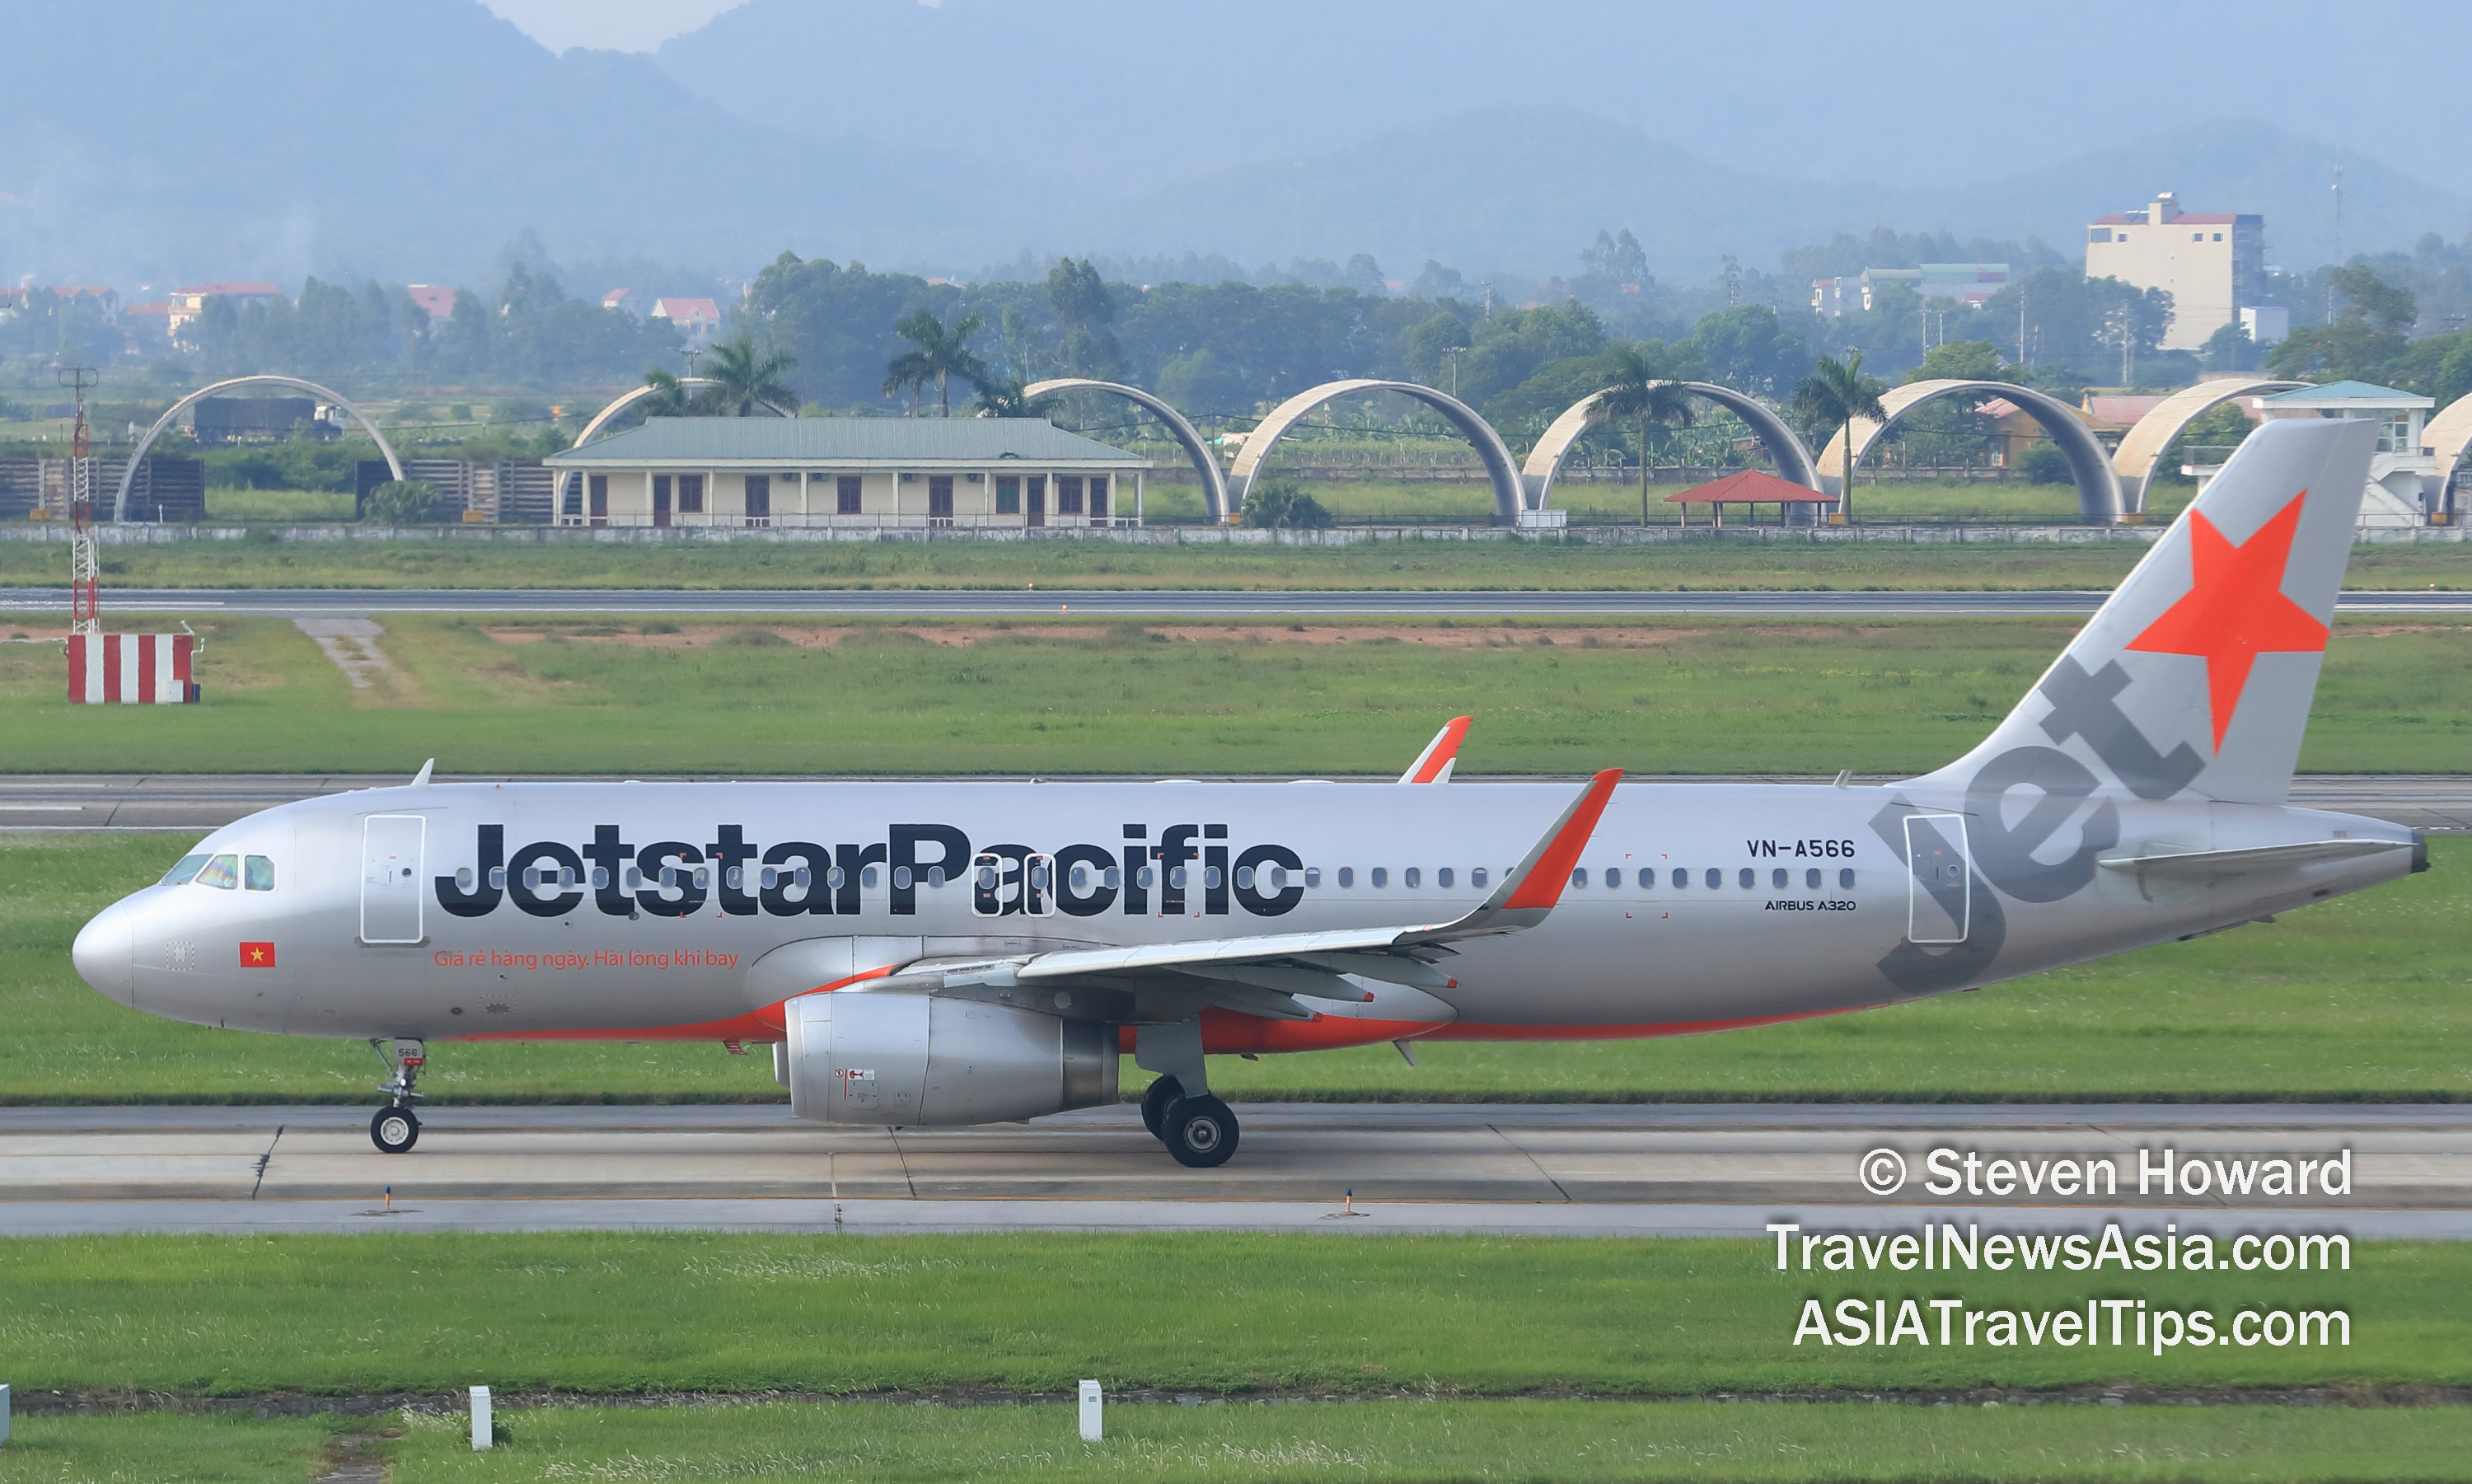 Until very recently, Pacific Airlines used to operate as Jetstar Pacific. The airline is now majority owned by Vietnam Airlines Group. Picture of the Jetstar Pacific Airbus A320 reg: VN-A566 by Steven Howard of TravelNewsAsia.com Click to enlarge.